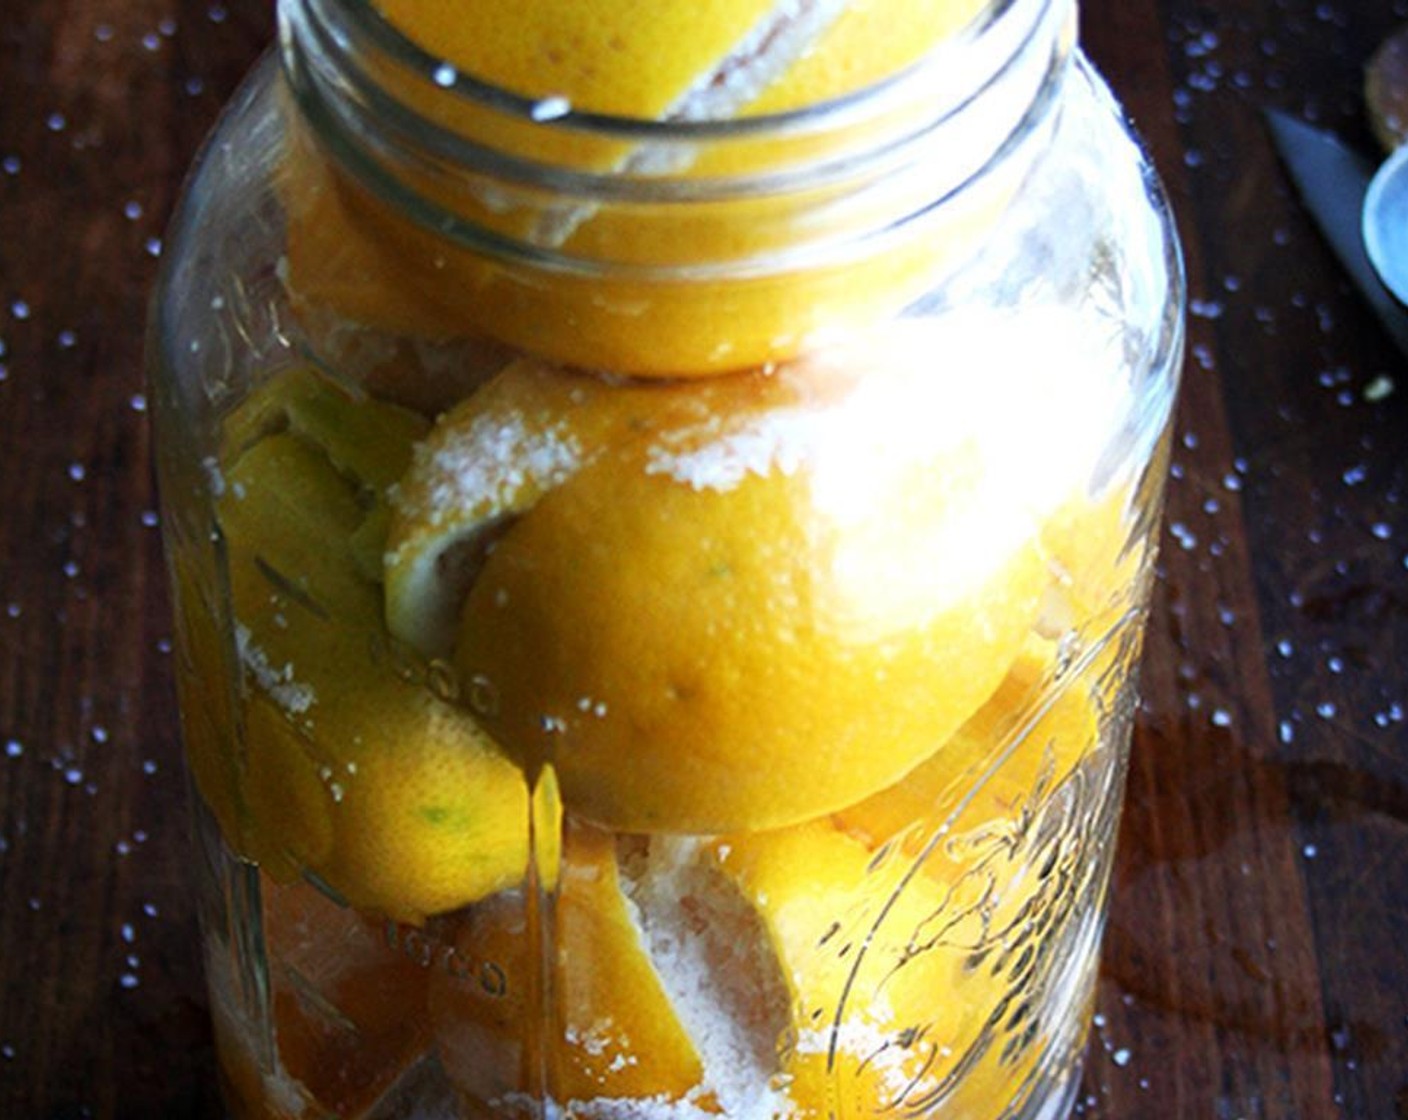 step 4 Push the lemons in tightly so they are squeezed together snugly. Seal the jar and leave in a cool spot for at least a week.